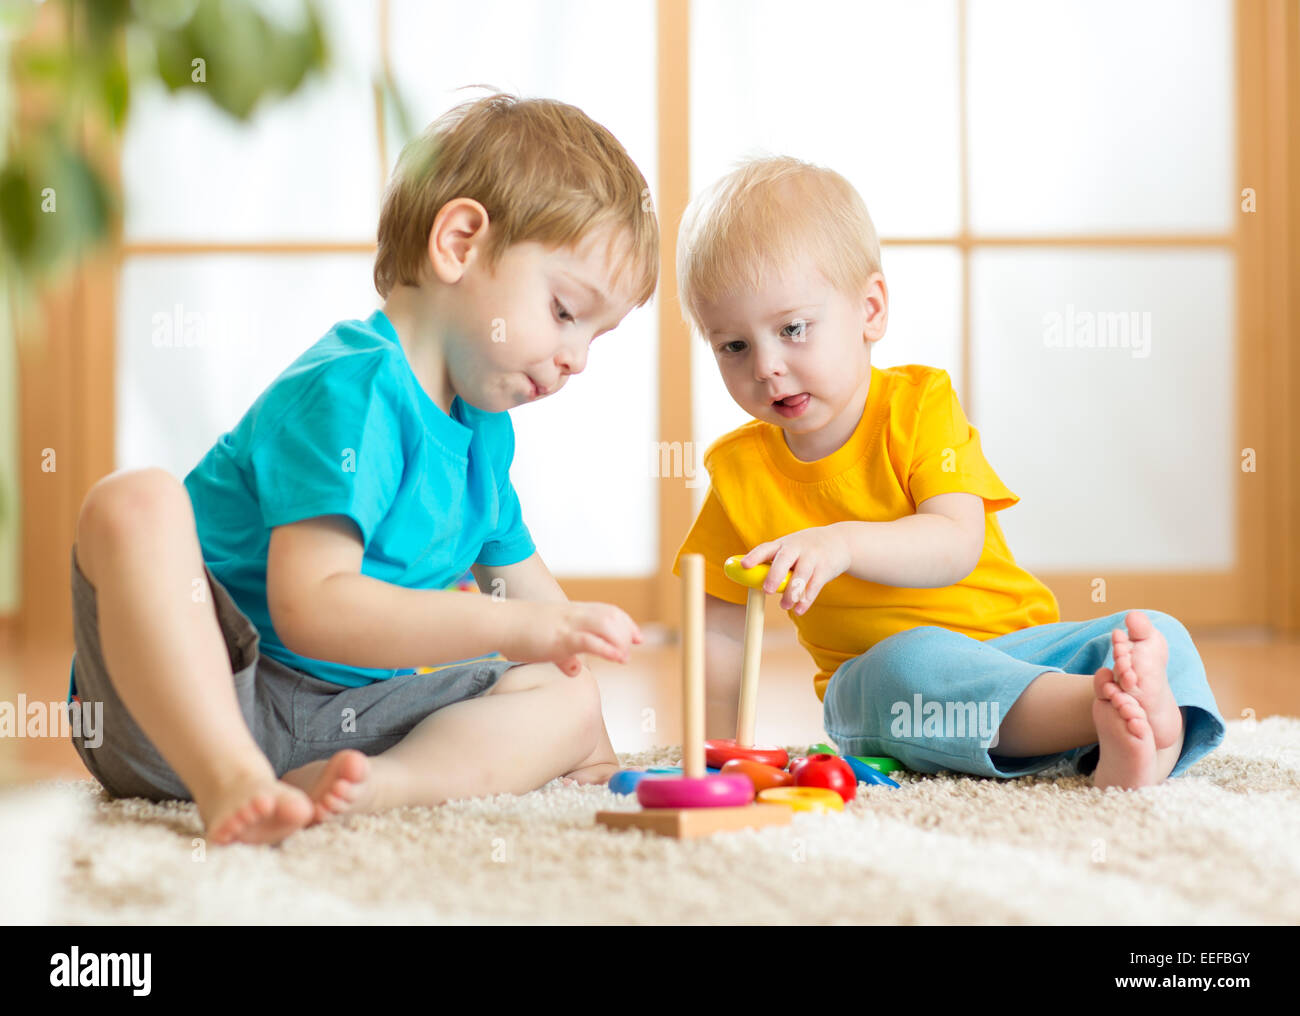 children boys with toys in playroom Stock Photo